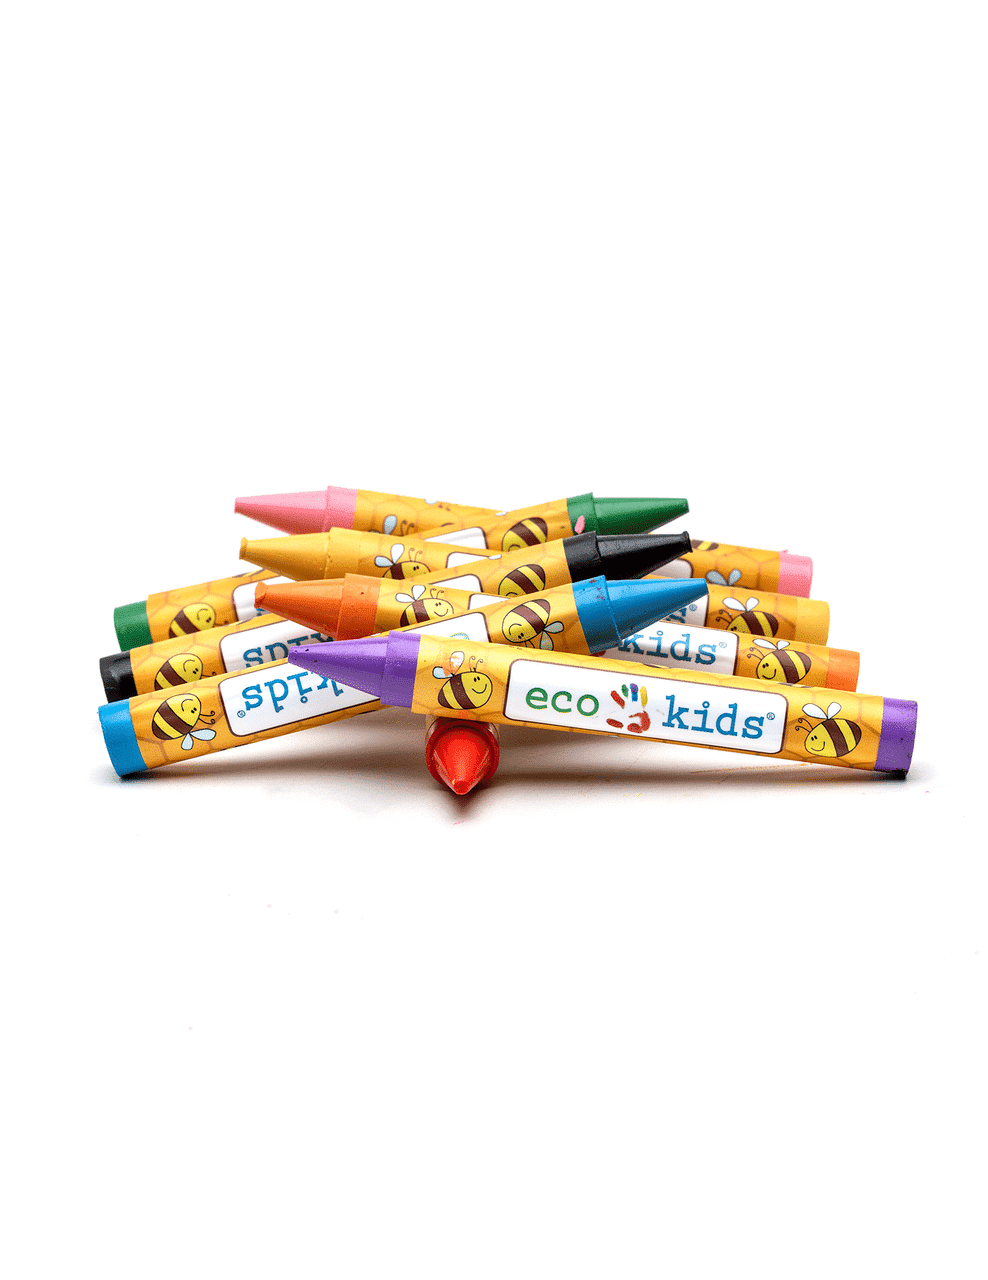 100% Pure Beeswax Crayons Made in New Zealand For 3 Years Plus 6